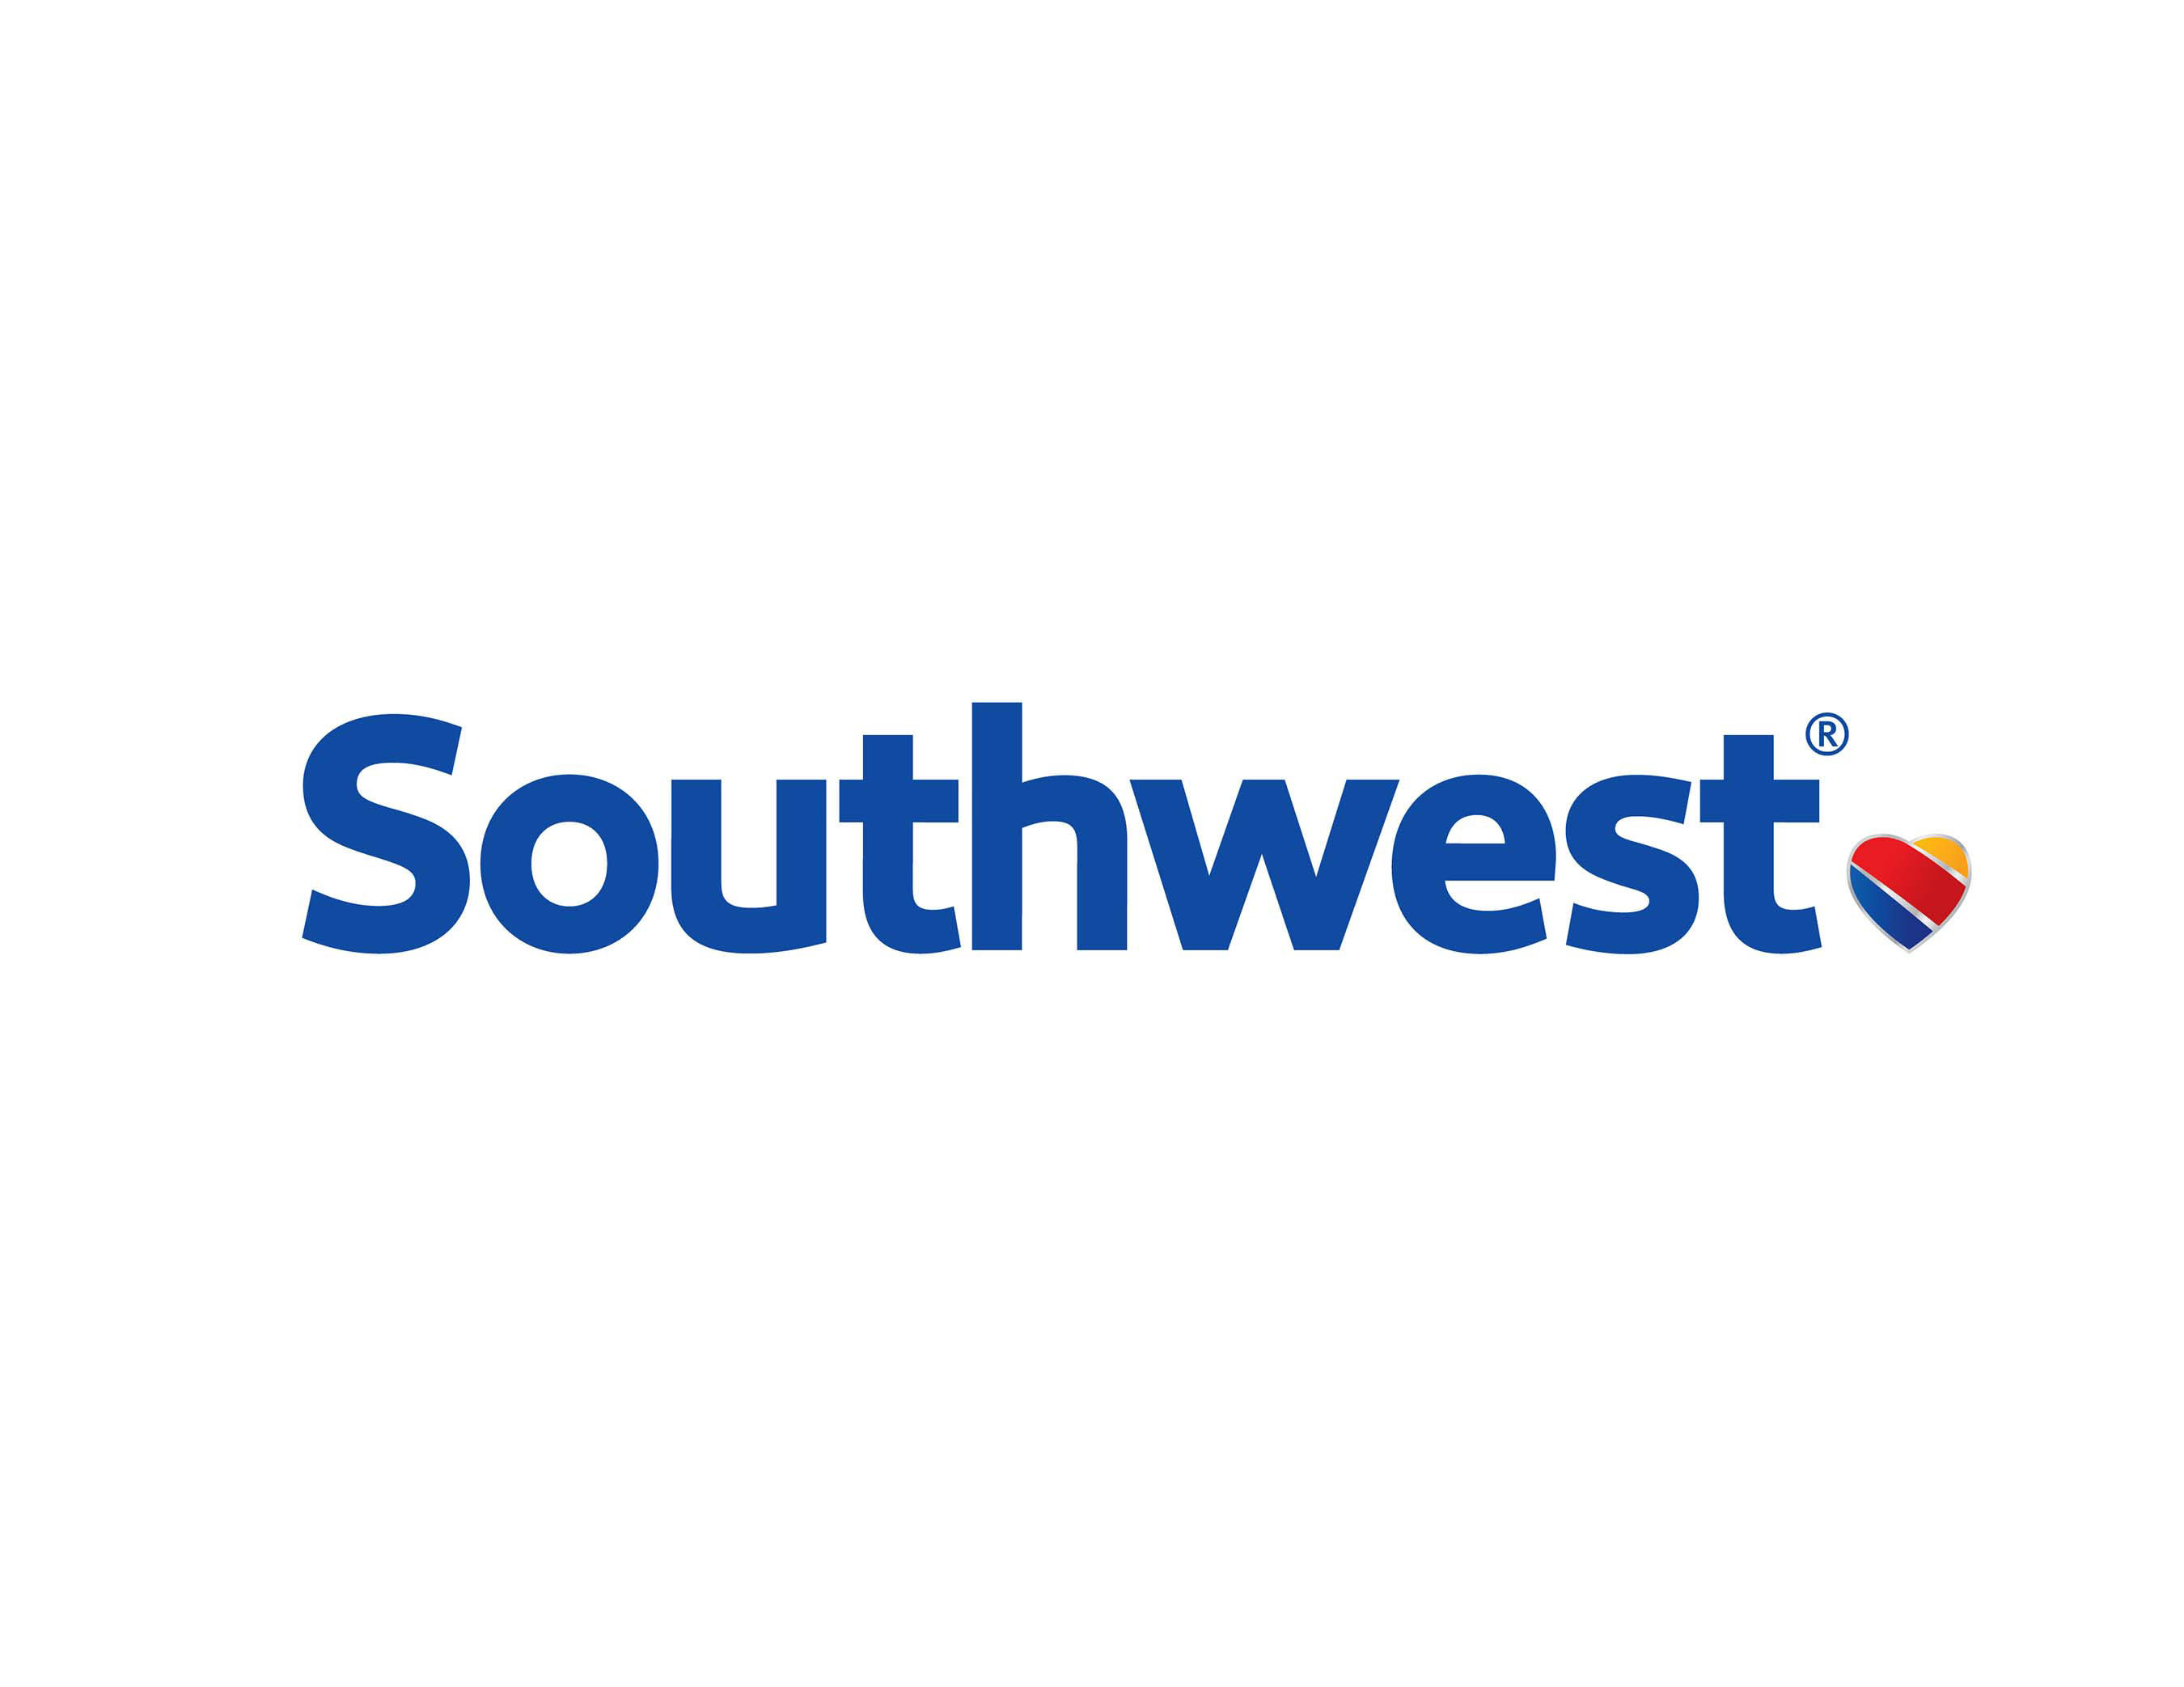 Southwest Airlines to Discuss Third Quarter 2019 Financial Results on October 24, 2019